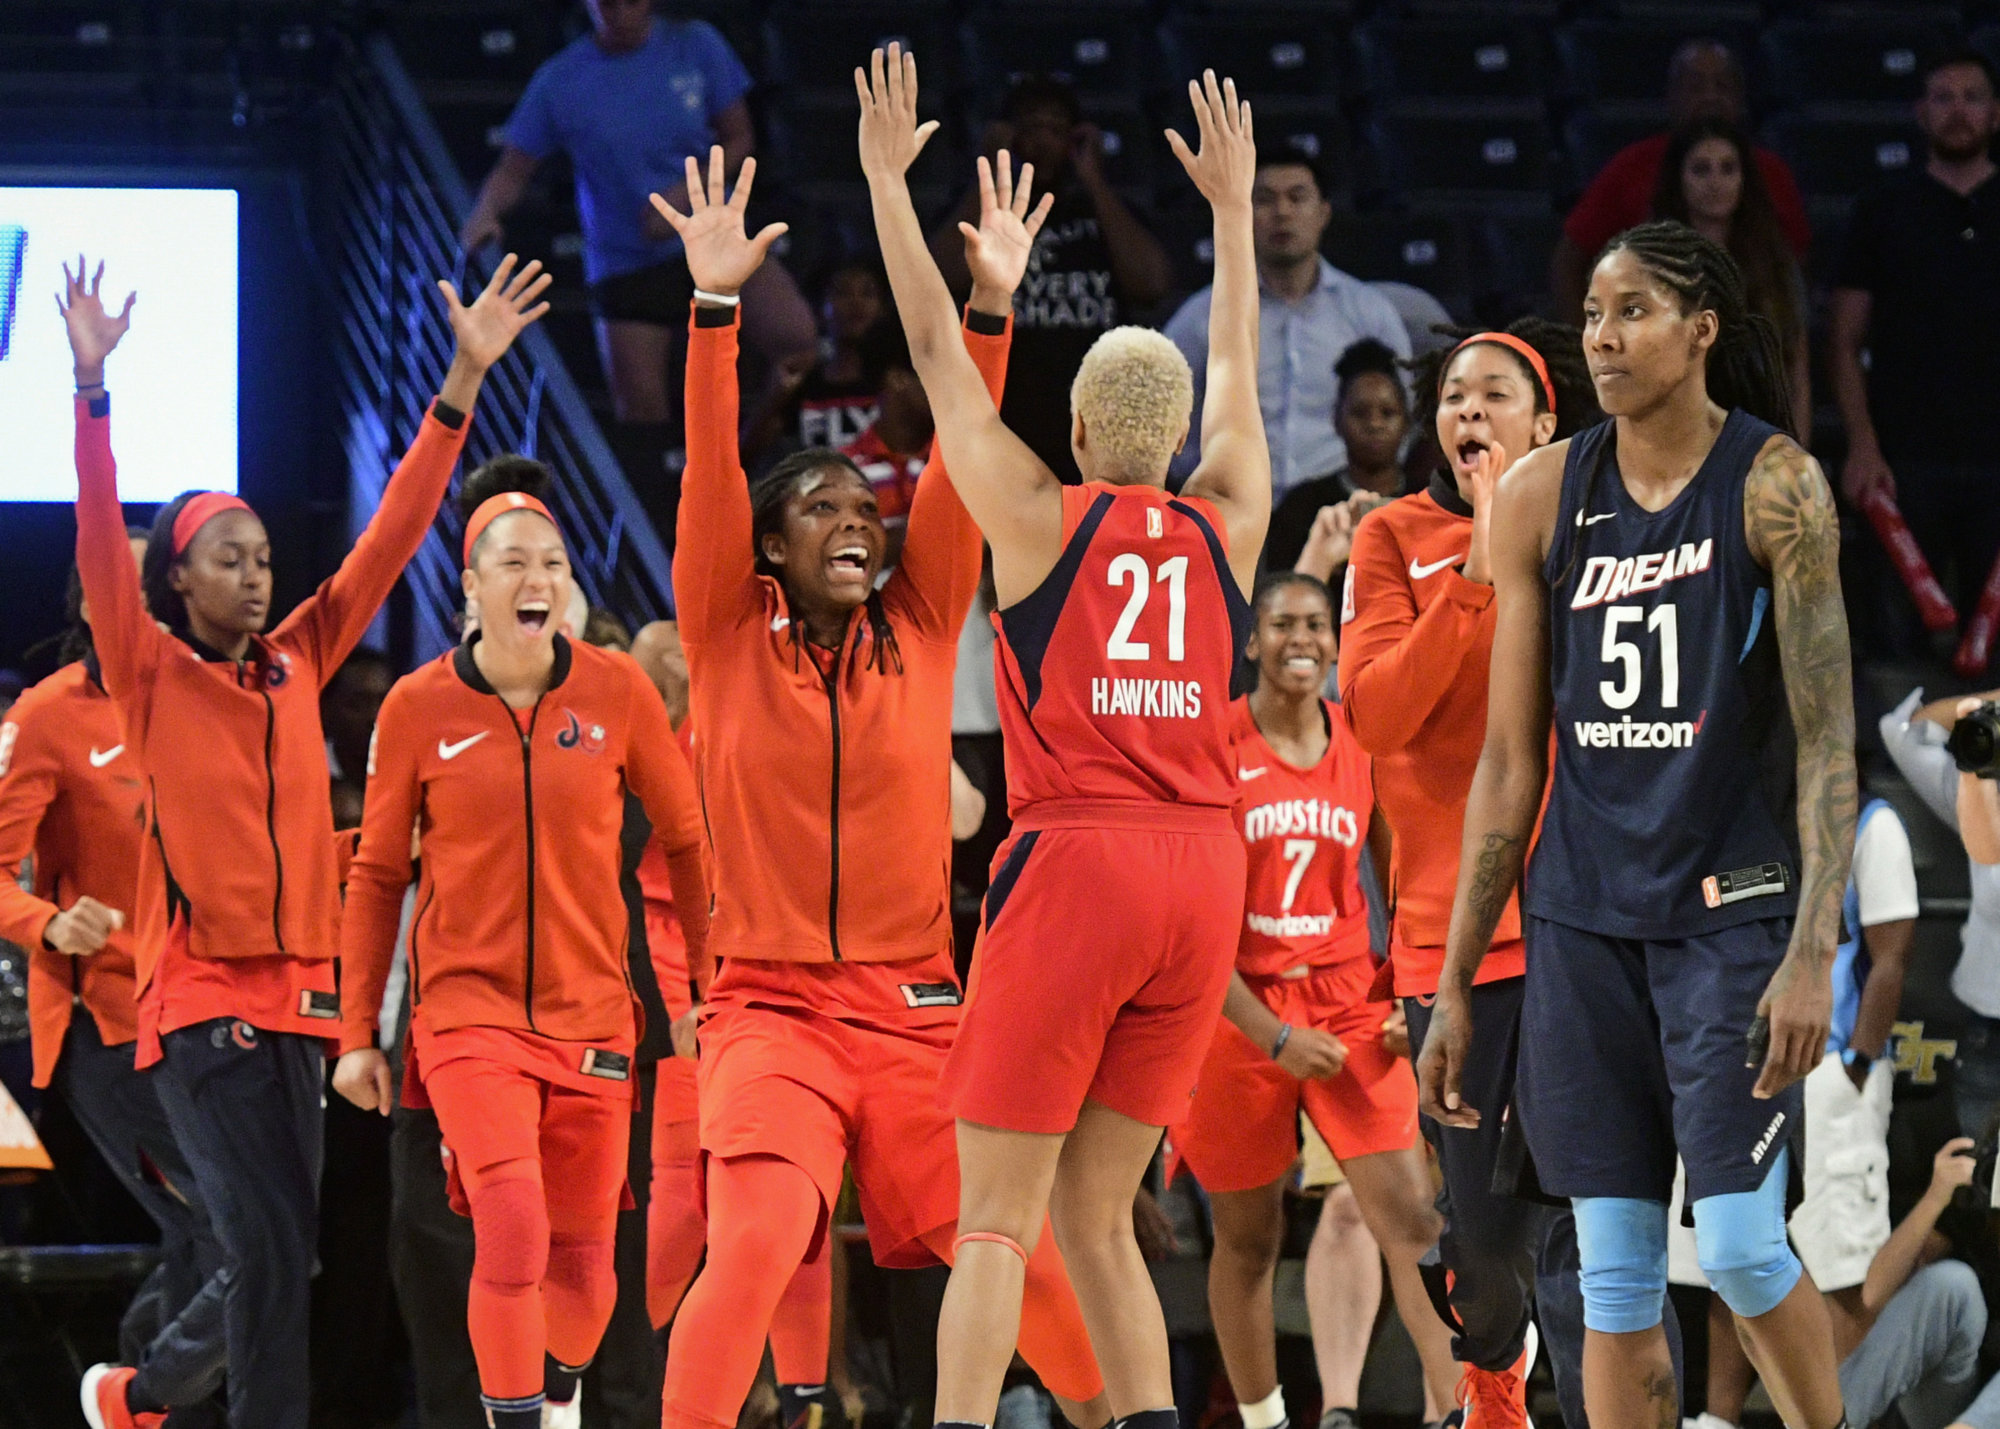 Washington Mystics center Krystal Thomas, second from right, forward Tianna Hawkins (21), forward Myisha Hines-Allen, fourth from right, and forward Aerial Powers, second from left, celebrate as Atlanta Dream forward Jessica Brelaat stands nearby, at the end of Game 5 in a WNBA basketball playoffs semifinal Tuesday, Sept. 4, 2018, in Atlanta. The Mystics won 86-8 to advance to the finals. (AP Photo/John Amis)